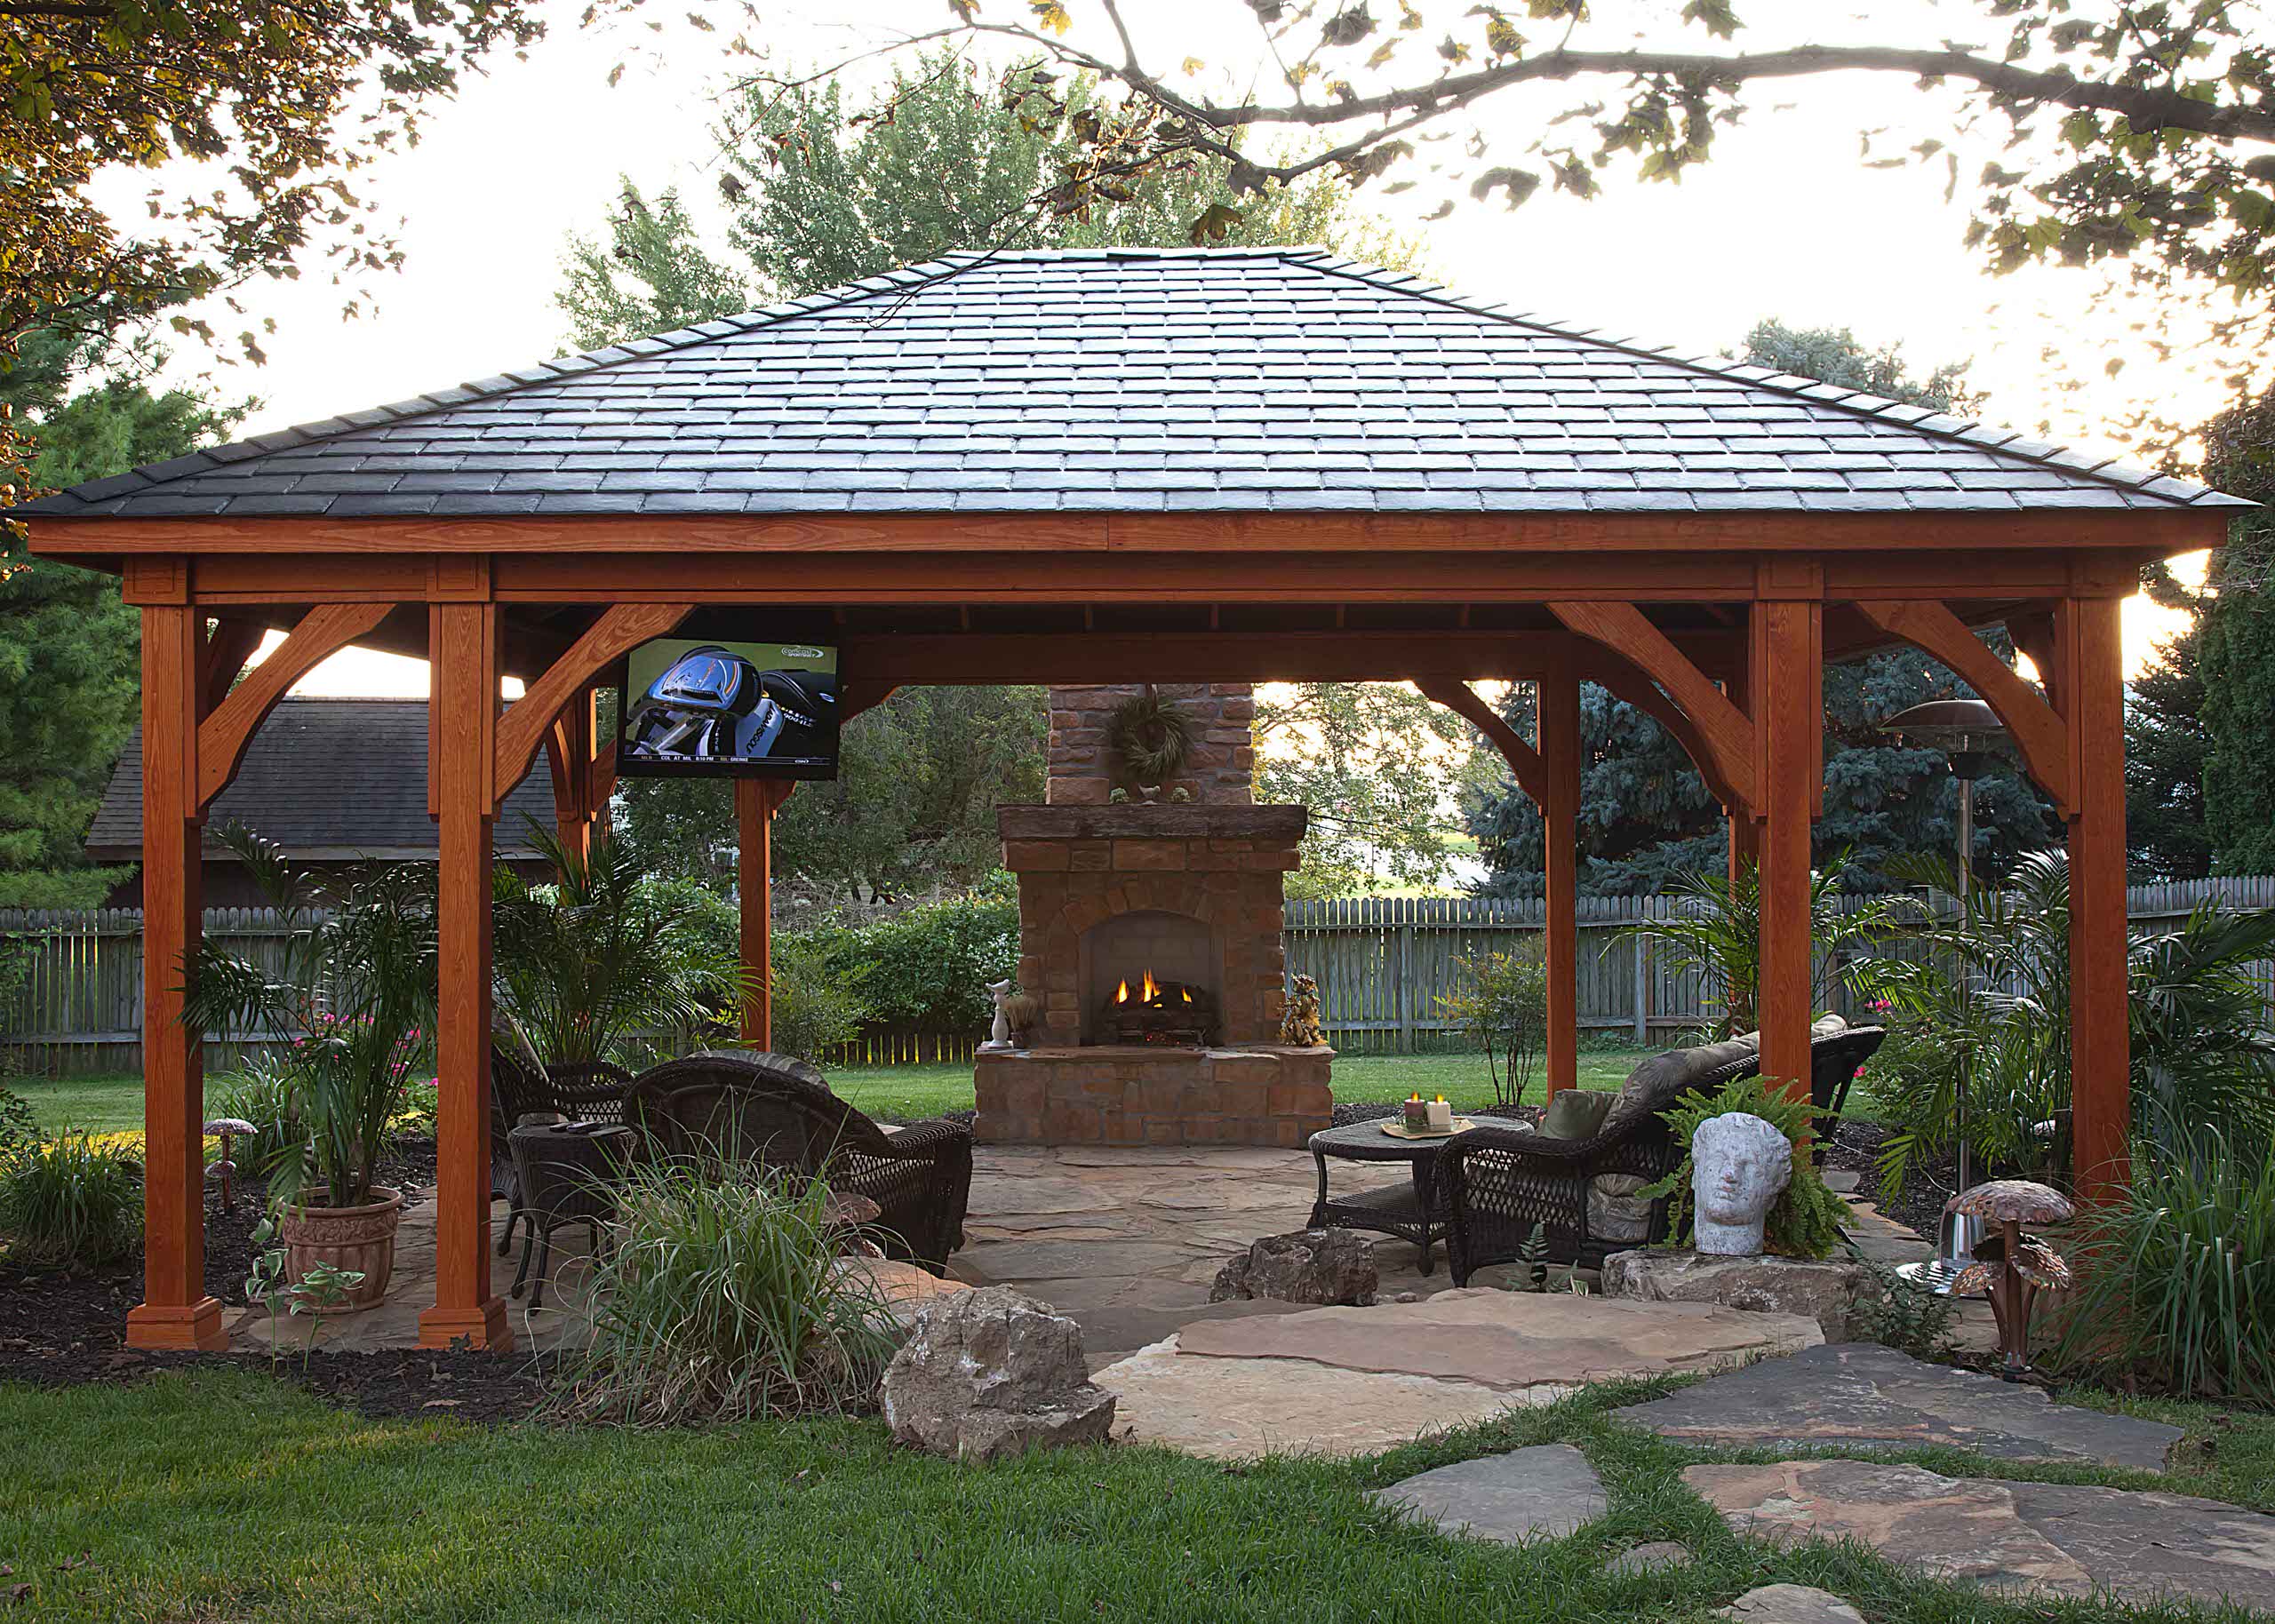 75 Outdoor with a Fire Pit and a Gazebo Ideas You'll Love - March, 2022 |  Houzz